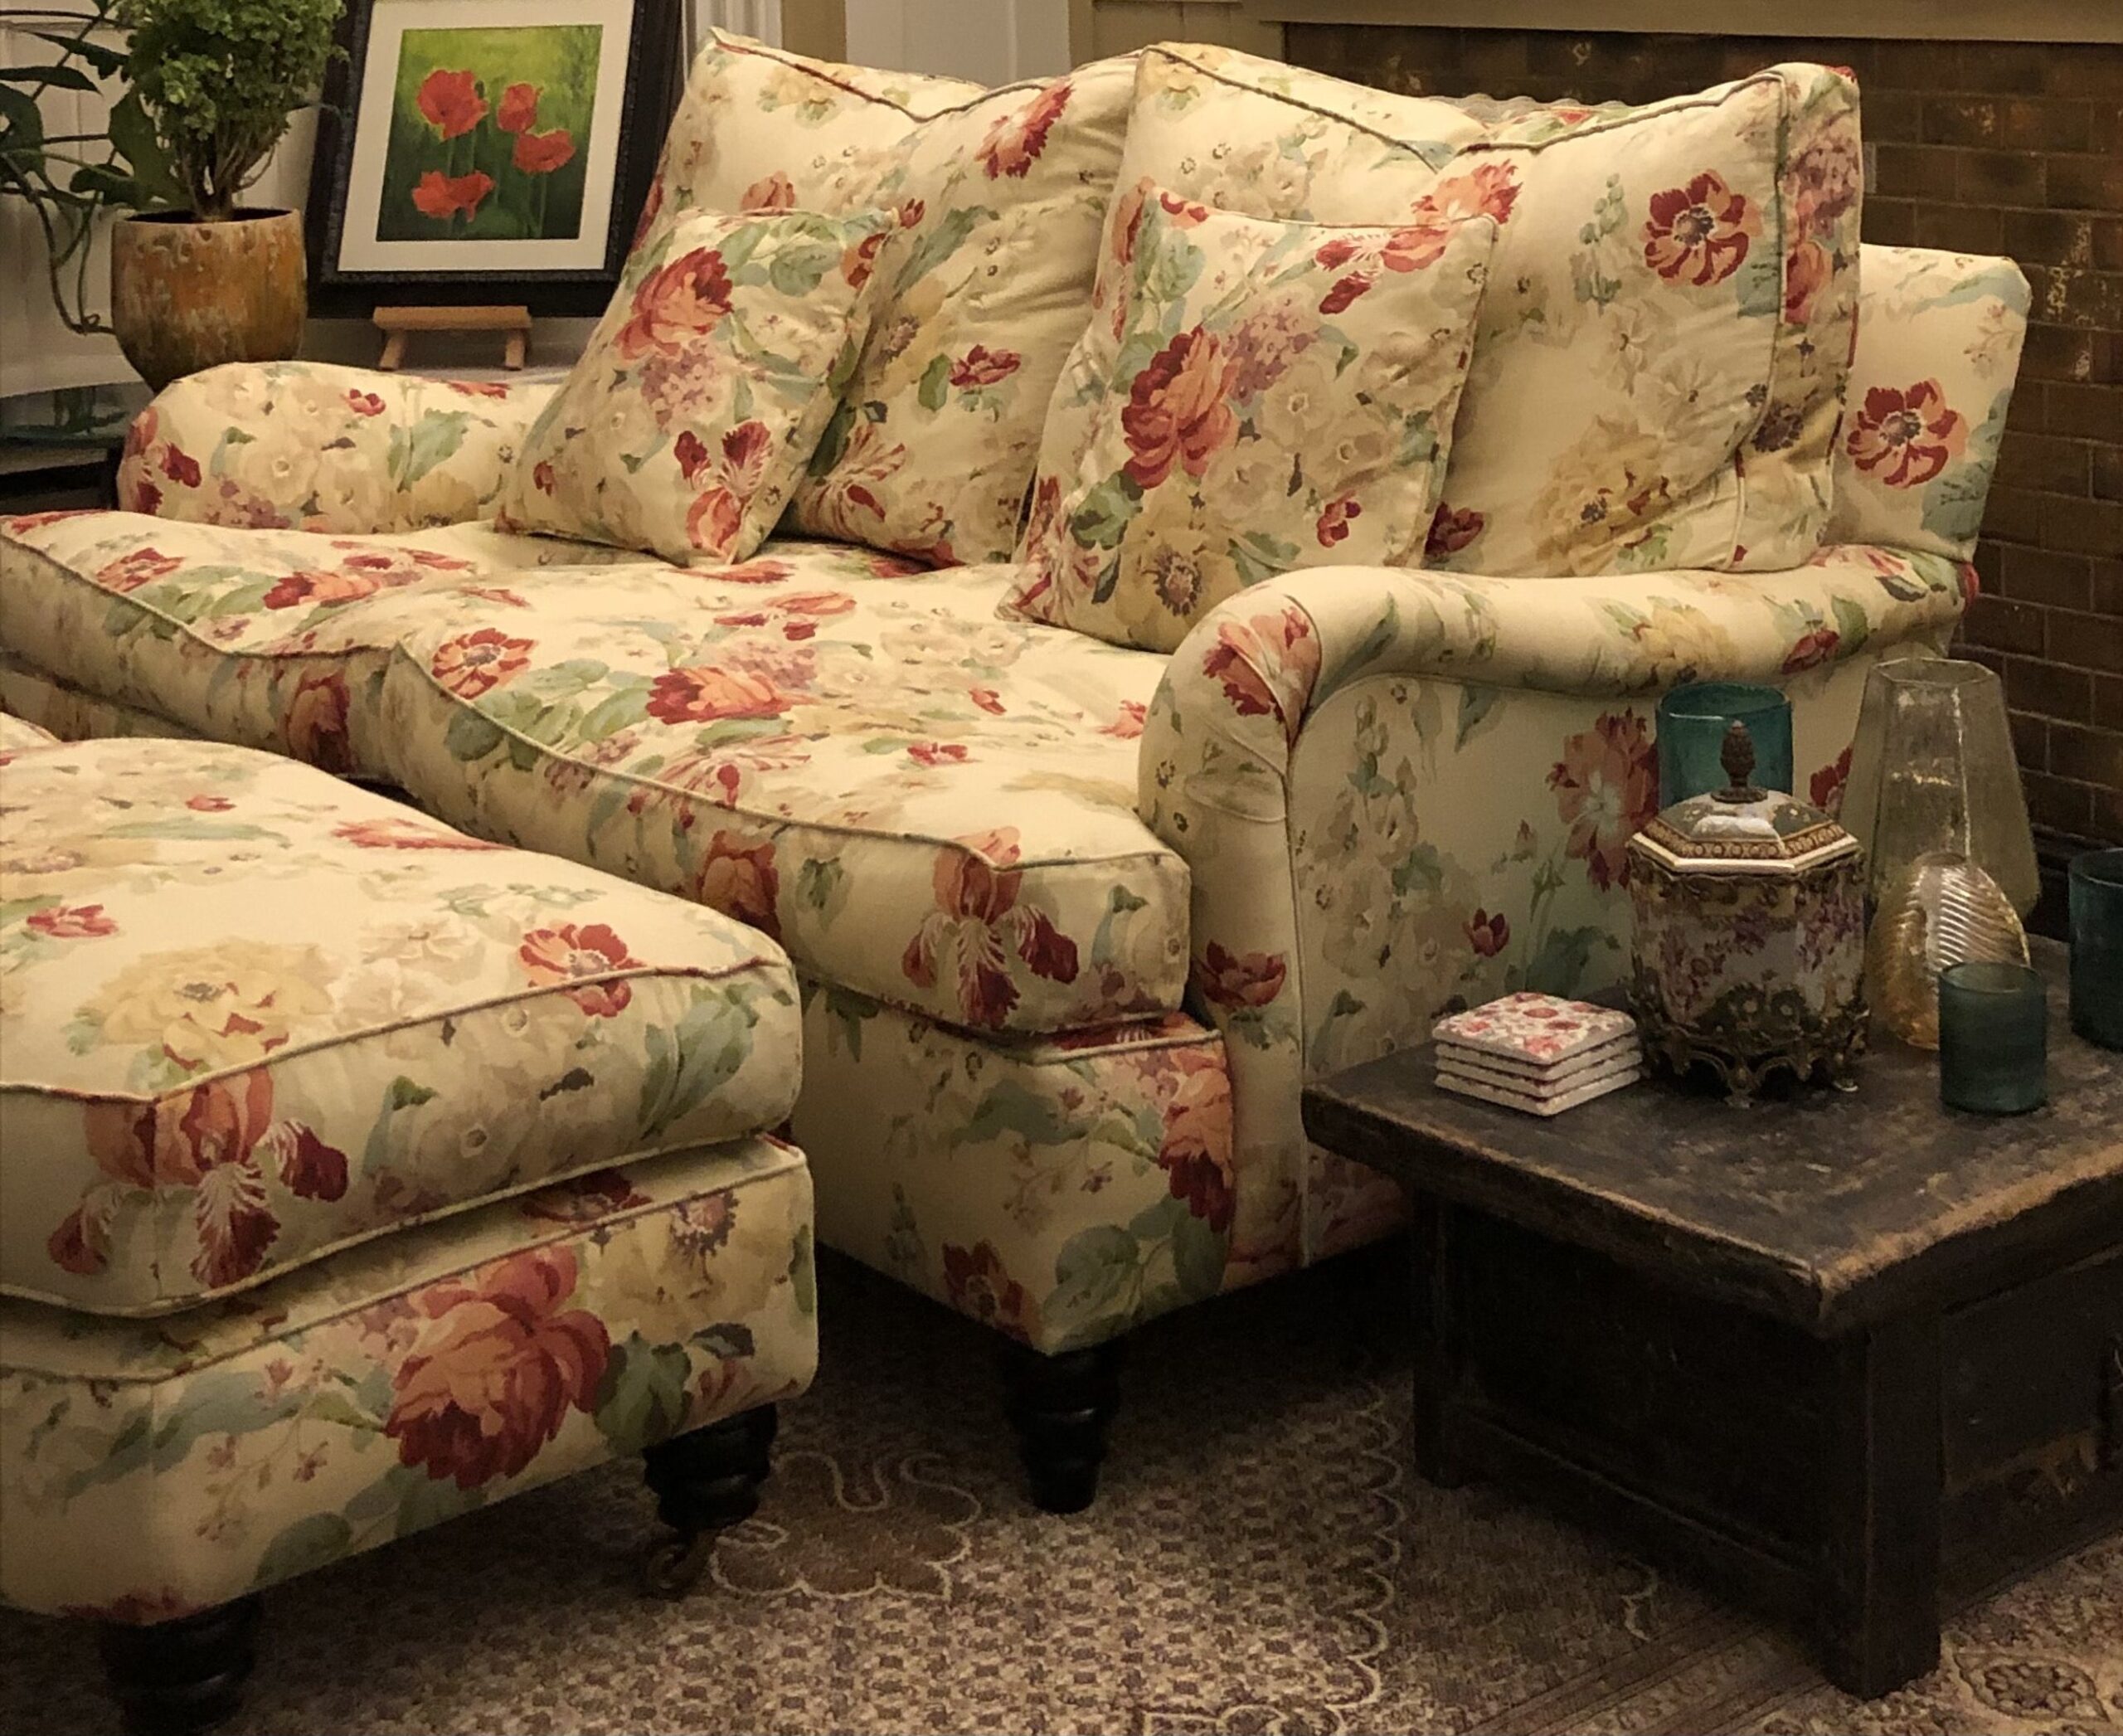 Bringing the Outdoors In: The Timeless Elegance of Floral Sofas and Chairs